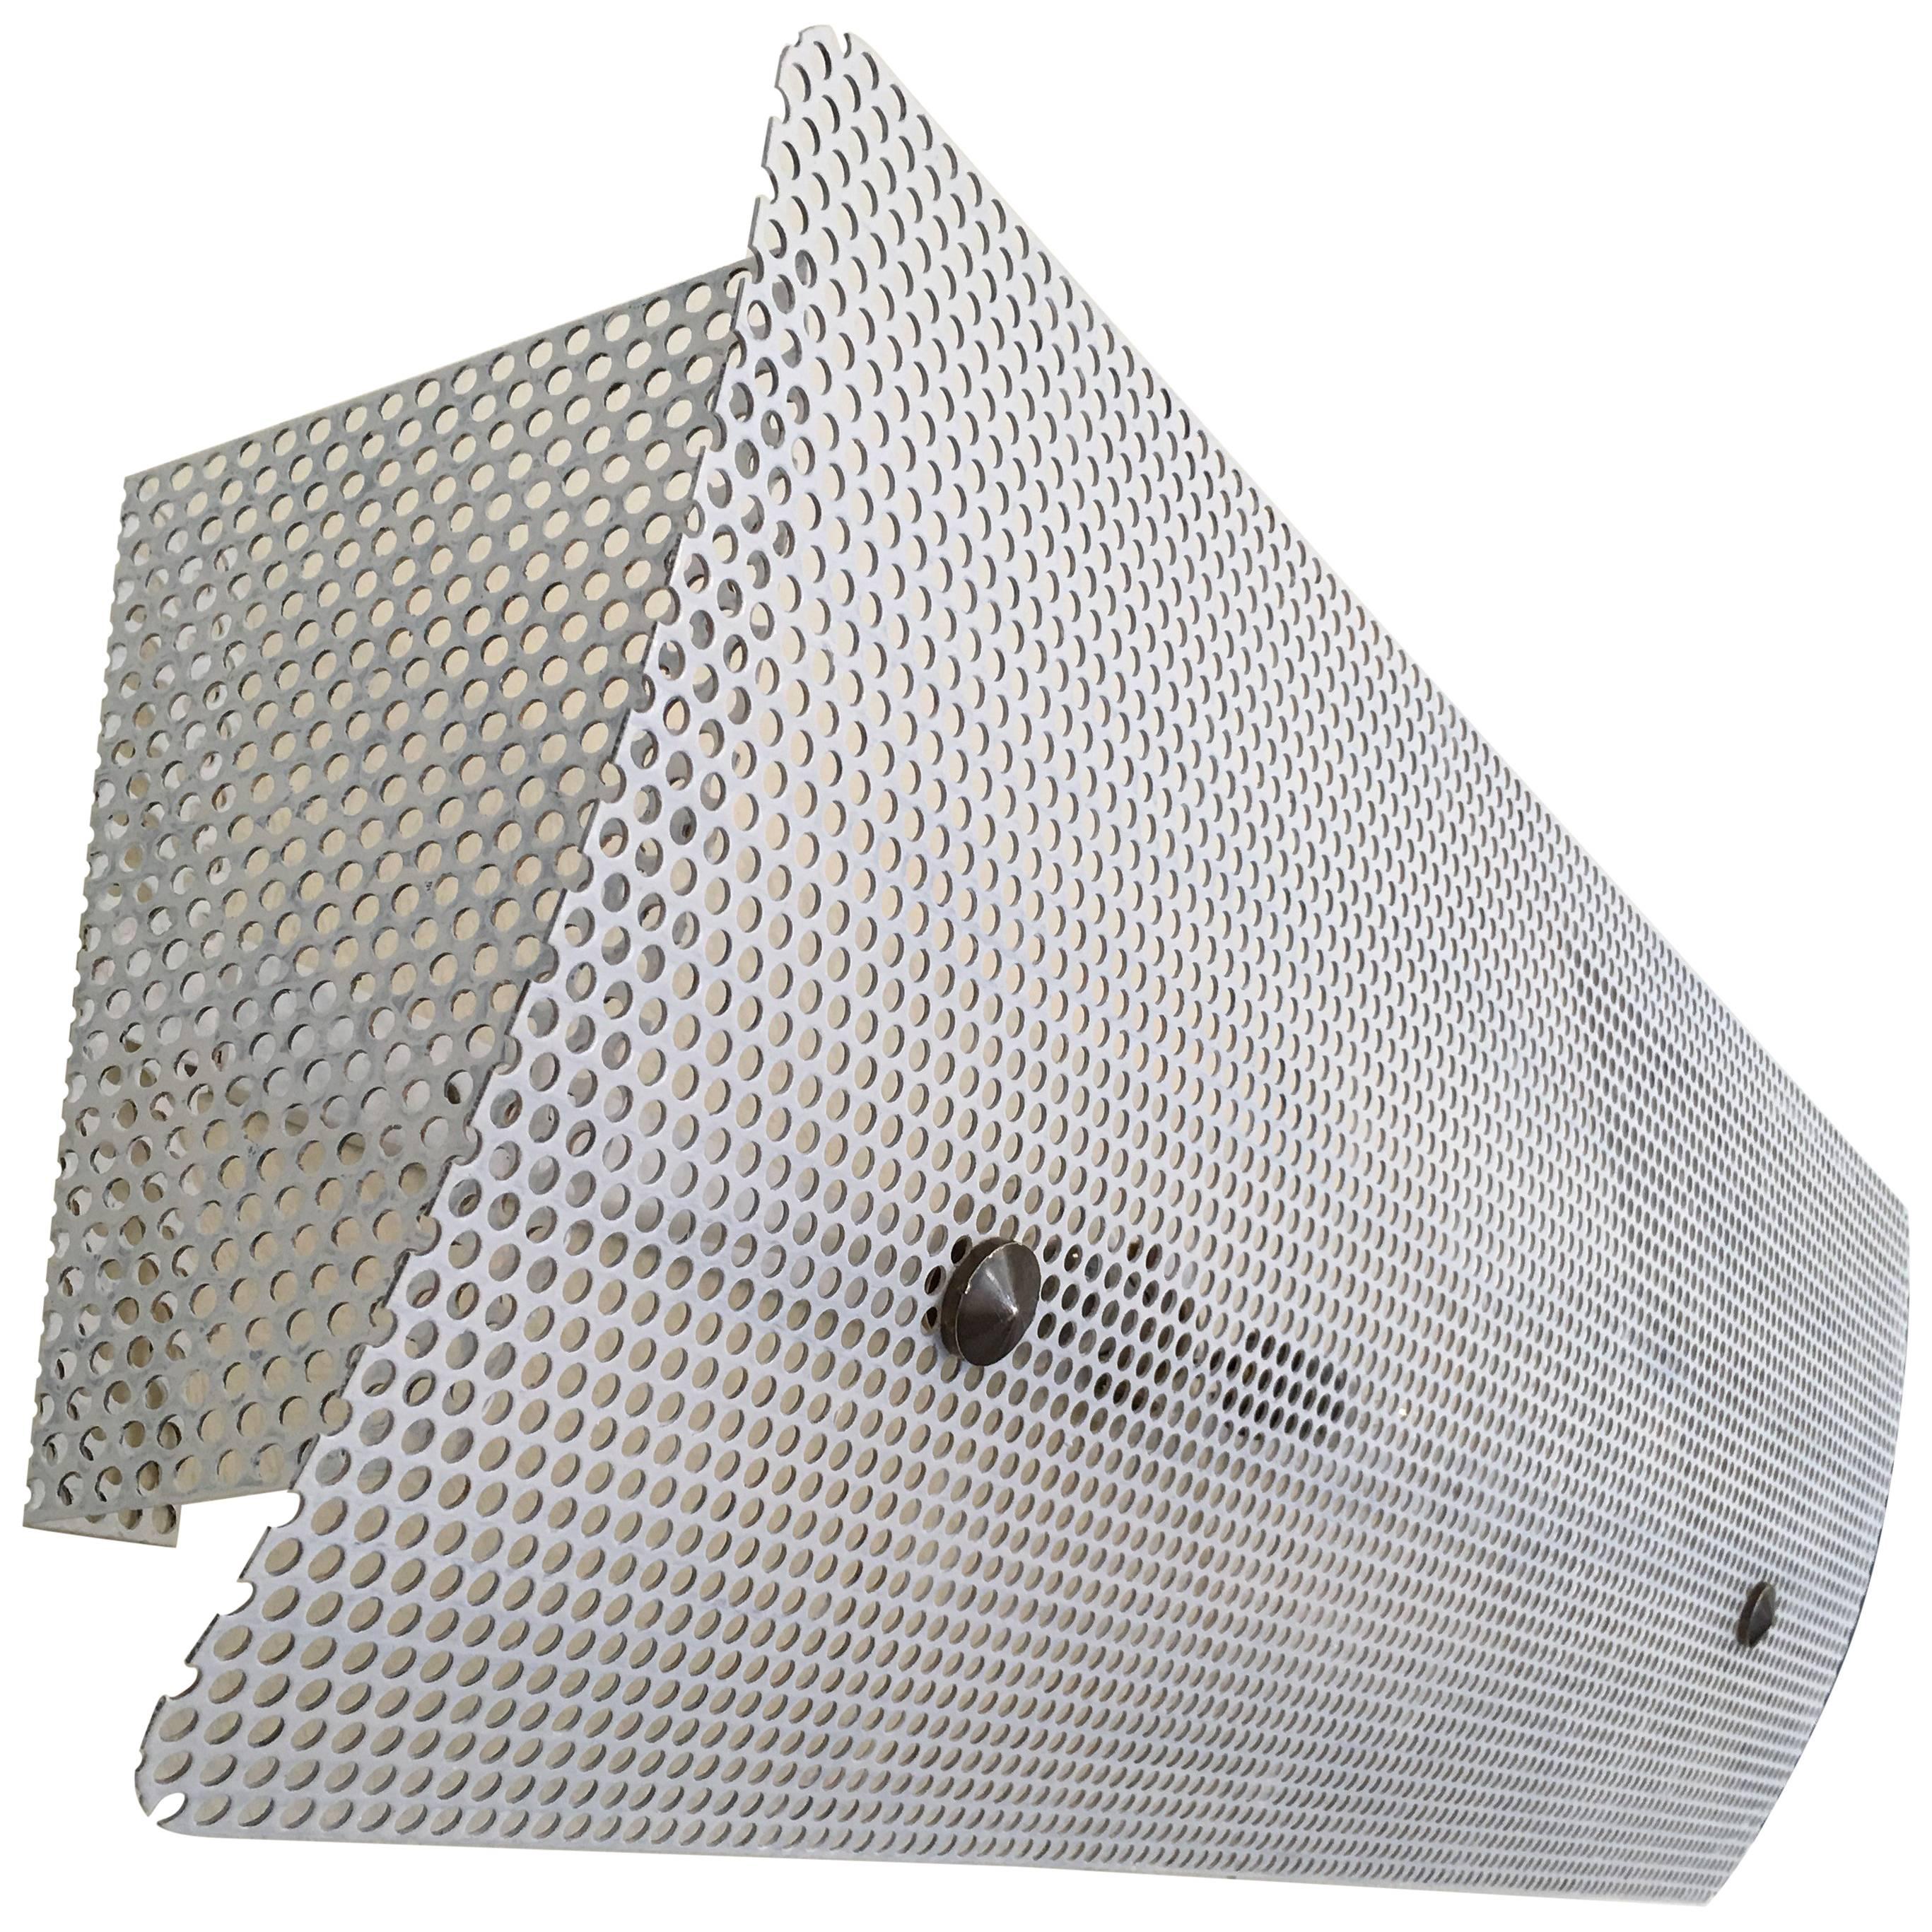 Pierre Guariche G320 Large White Perforated Metal Wall Lamp, 1952, France For Sale